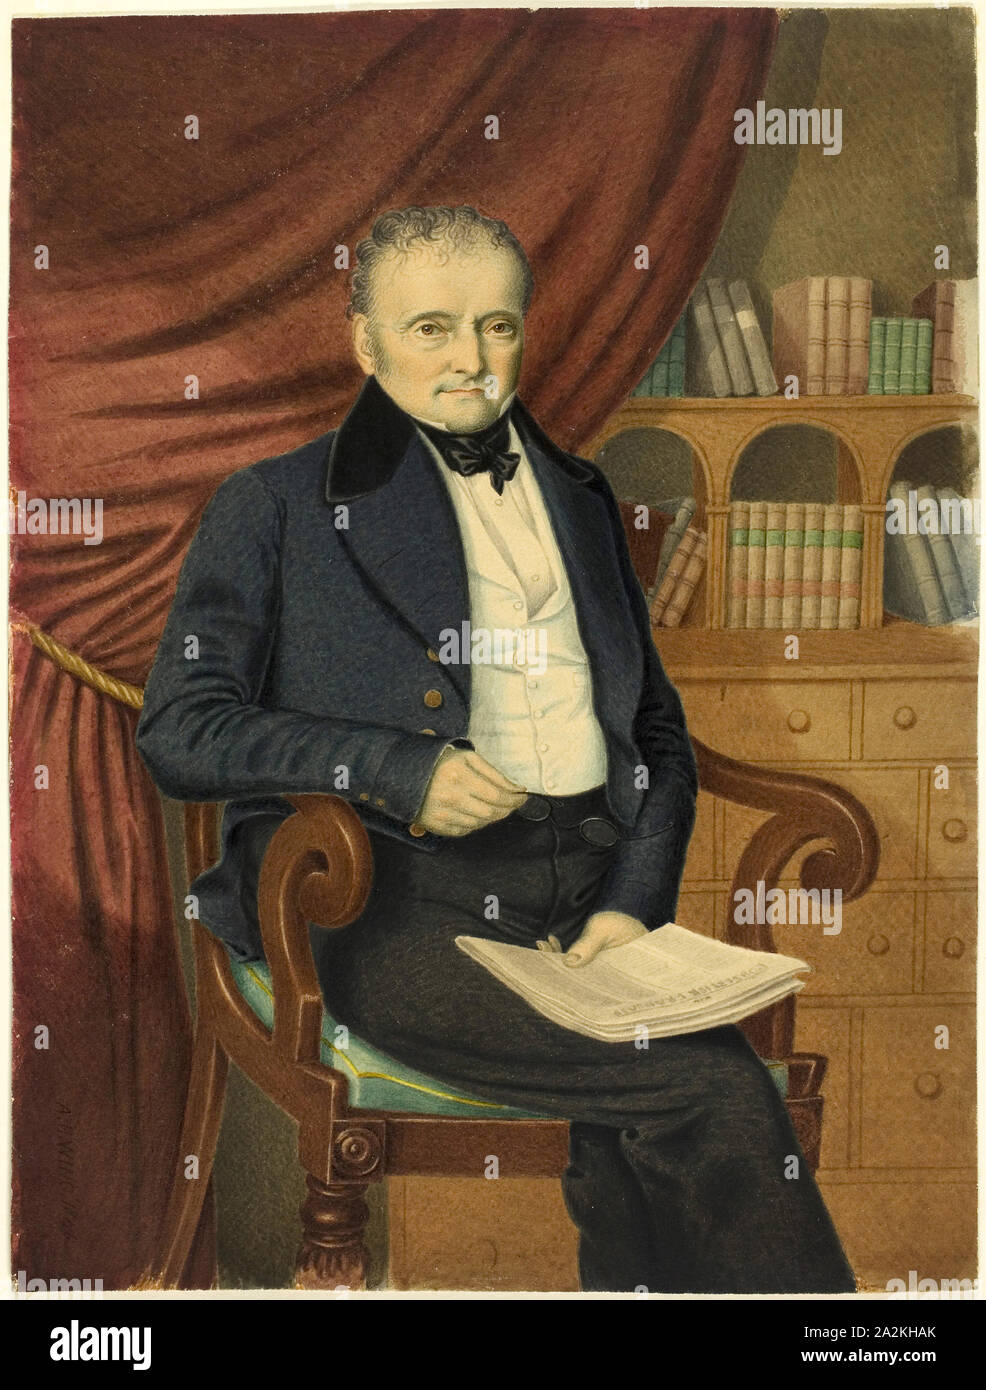 Portrait of Seated Man with Newspaper, c. 1846, Attributed to Adolphus H. A. Wing, English, 19th century, United Kingdom, Watercolor, heightened with gum varnish, on ivory wove paper, tipped onto ivory wove paper, 226 x 171 mm Stock Photo